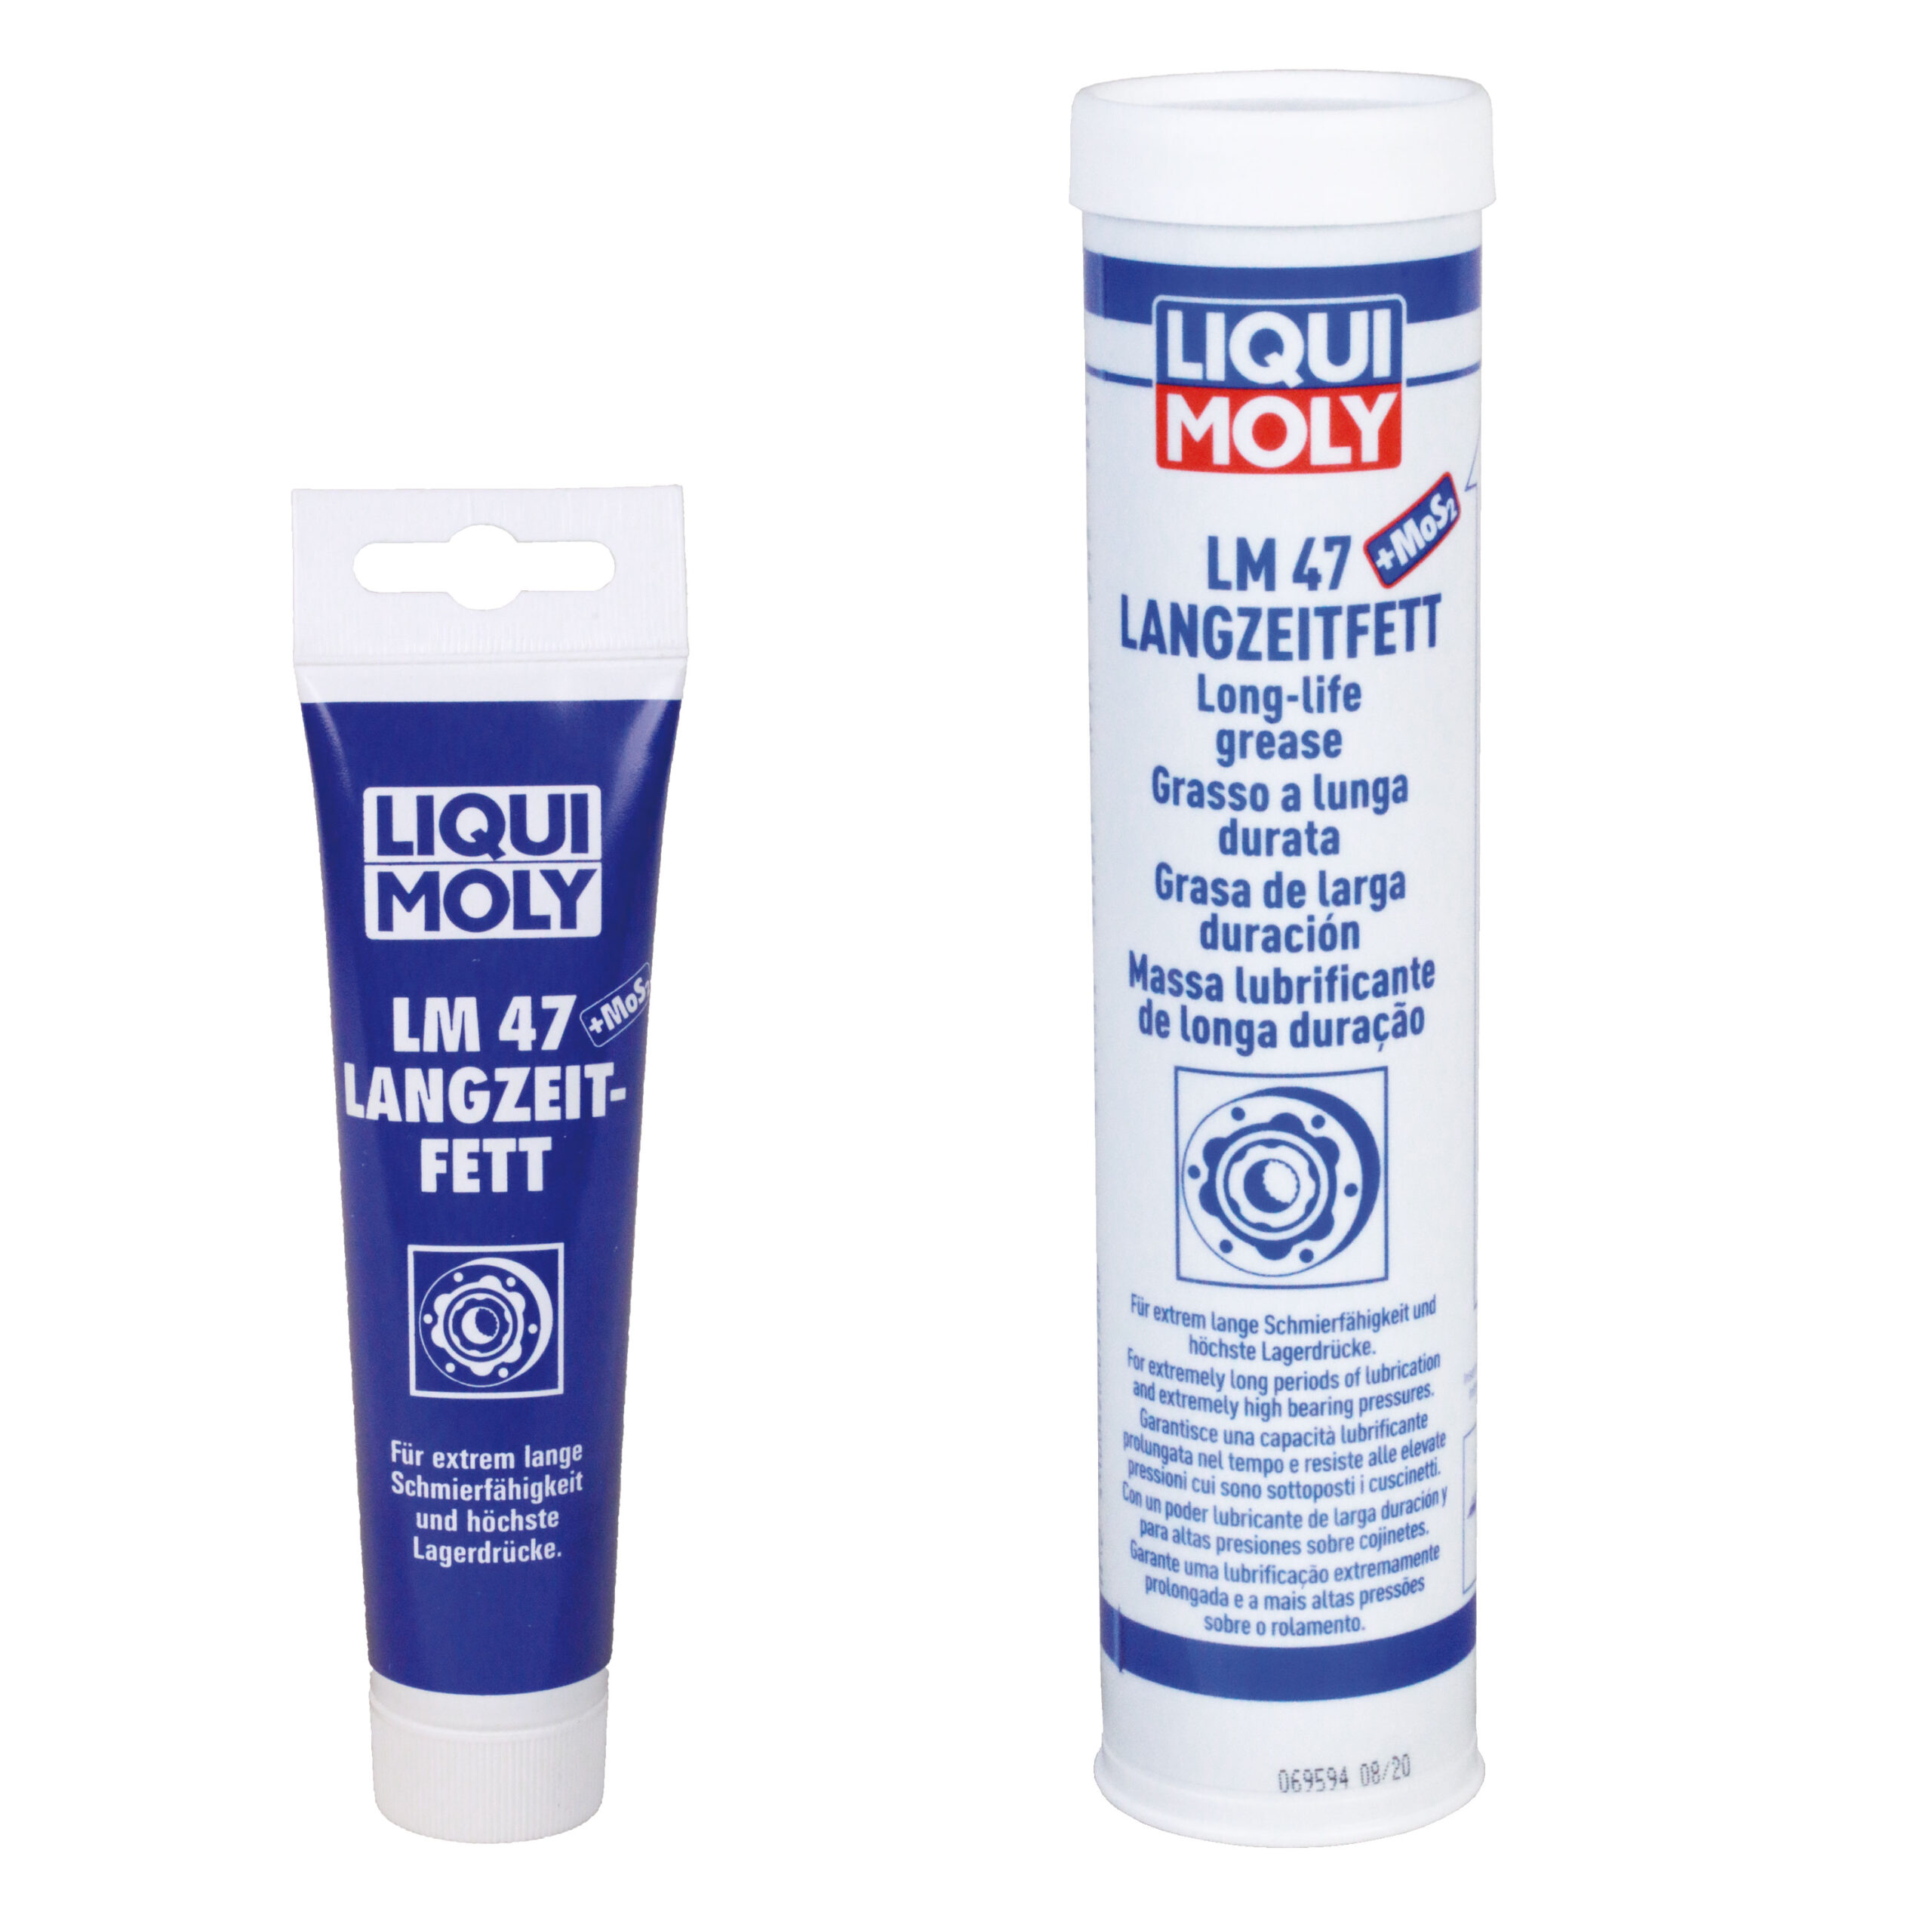 Liqui Moly Sales Up for 2022 - Lubes'N'Greases